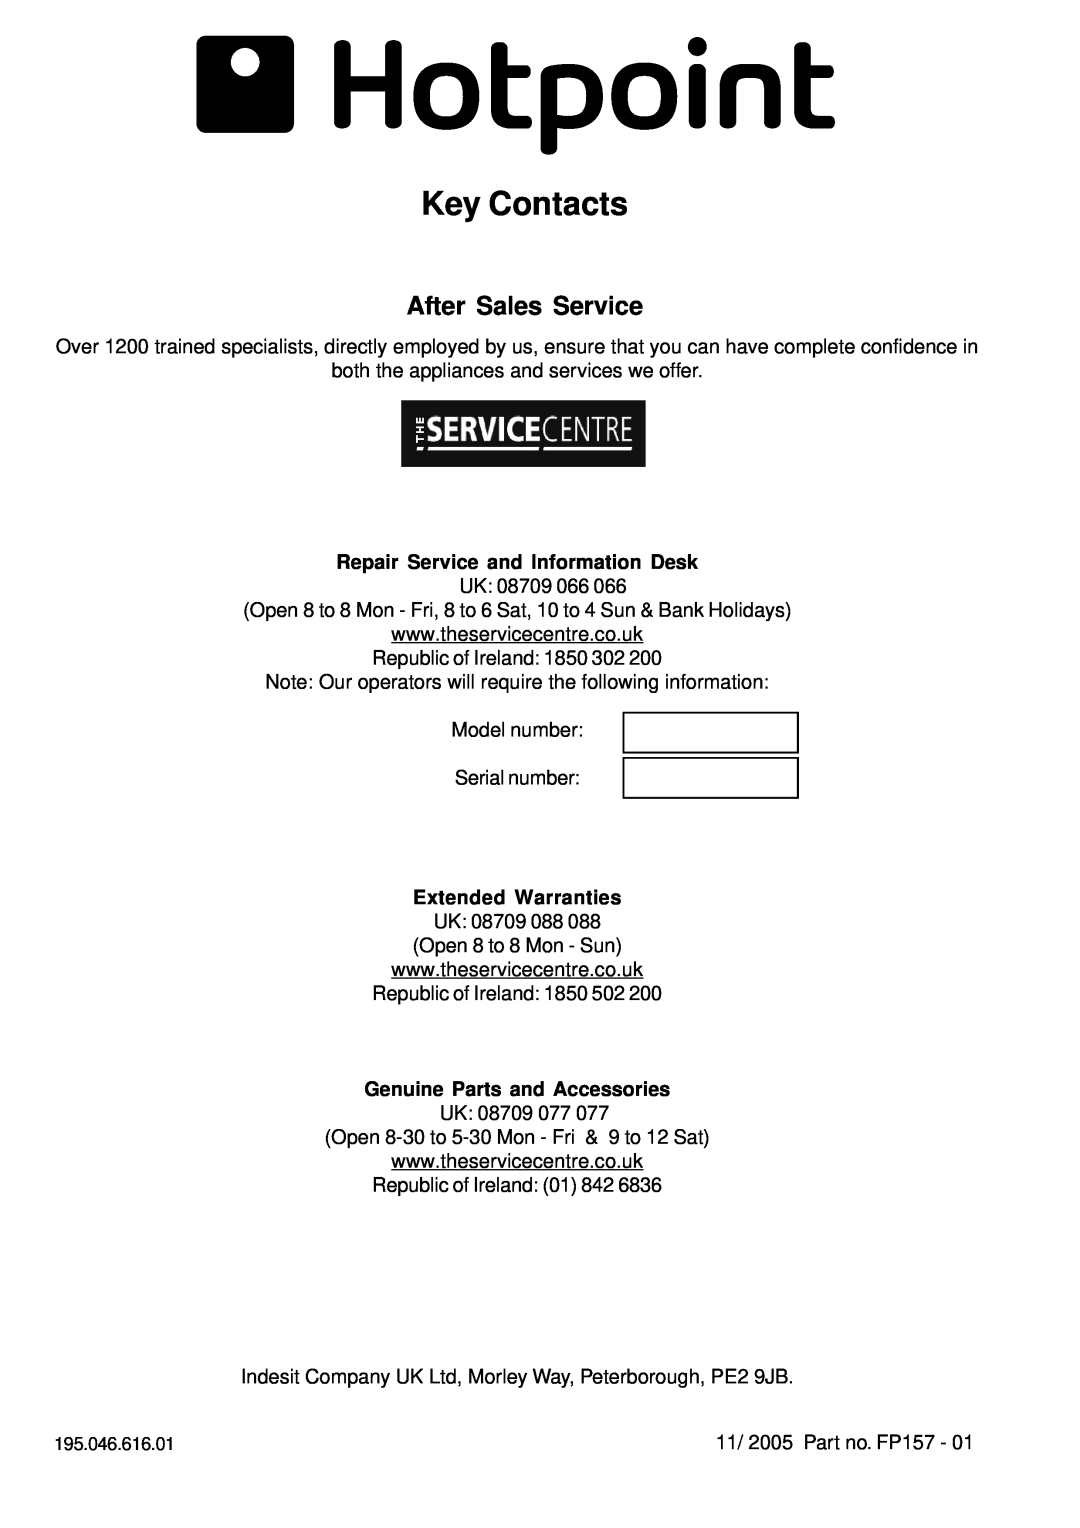 Hotpoint GC640 manual Key Contacts, After Sales Service, Repair Service and Information Desk, Extended Warranties 